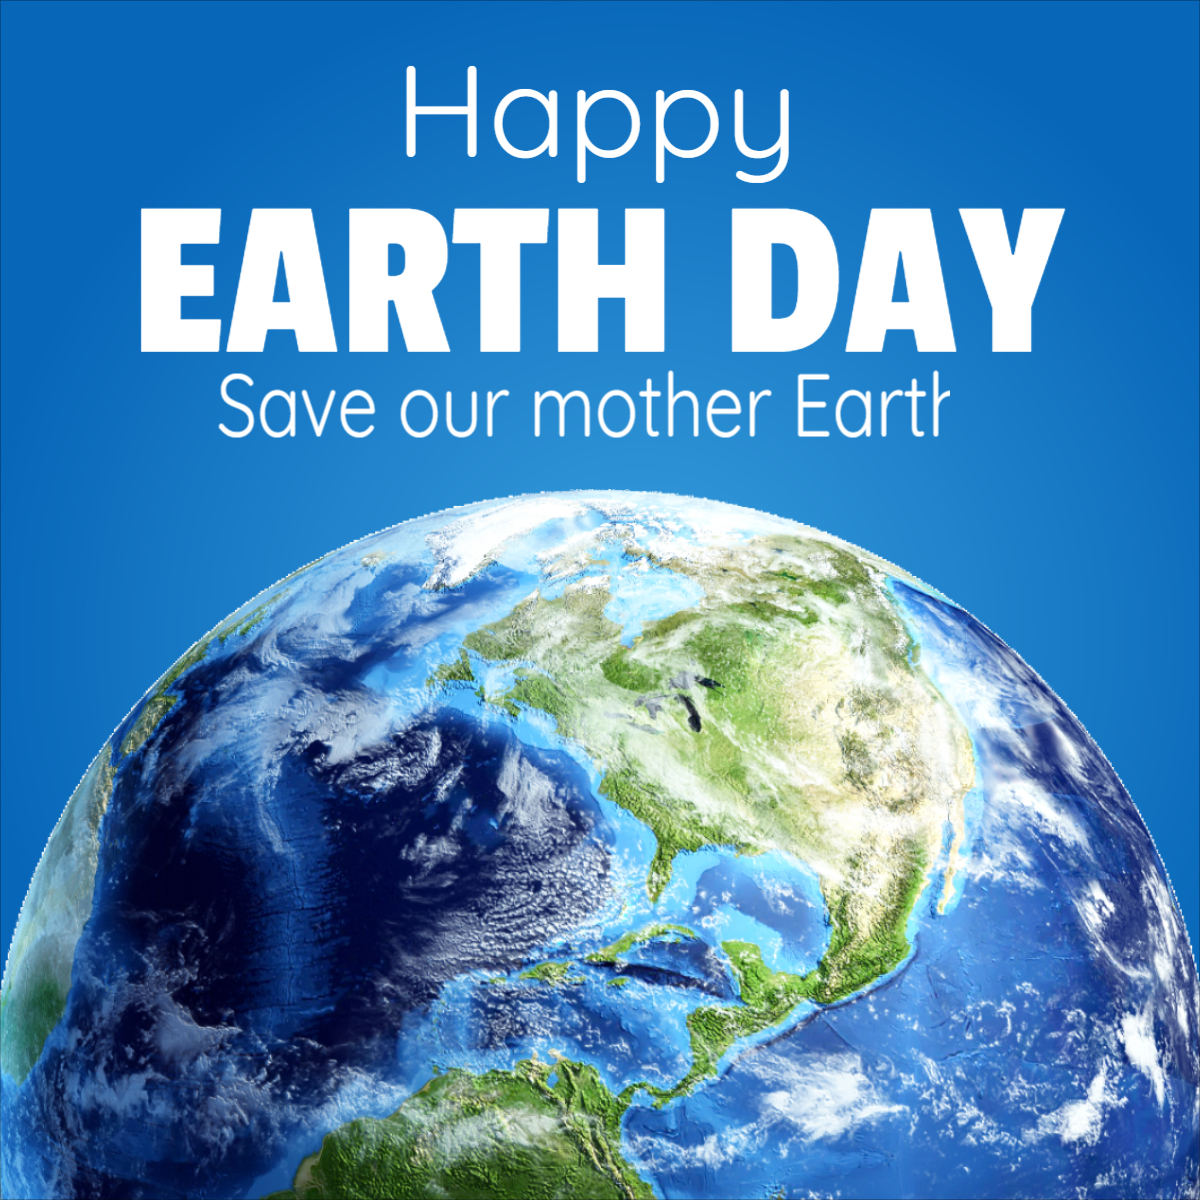 Happy International Earth Day 22 April Wishes Template Download For Free